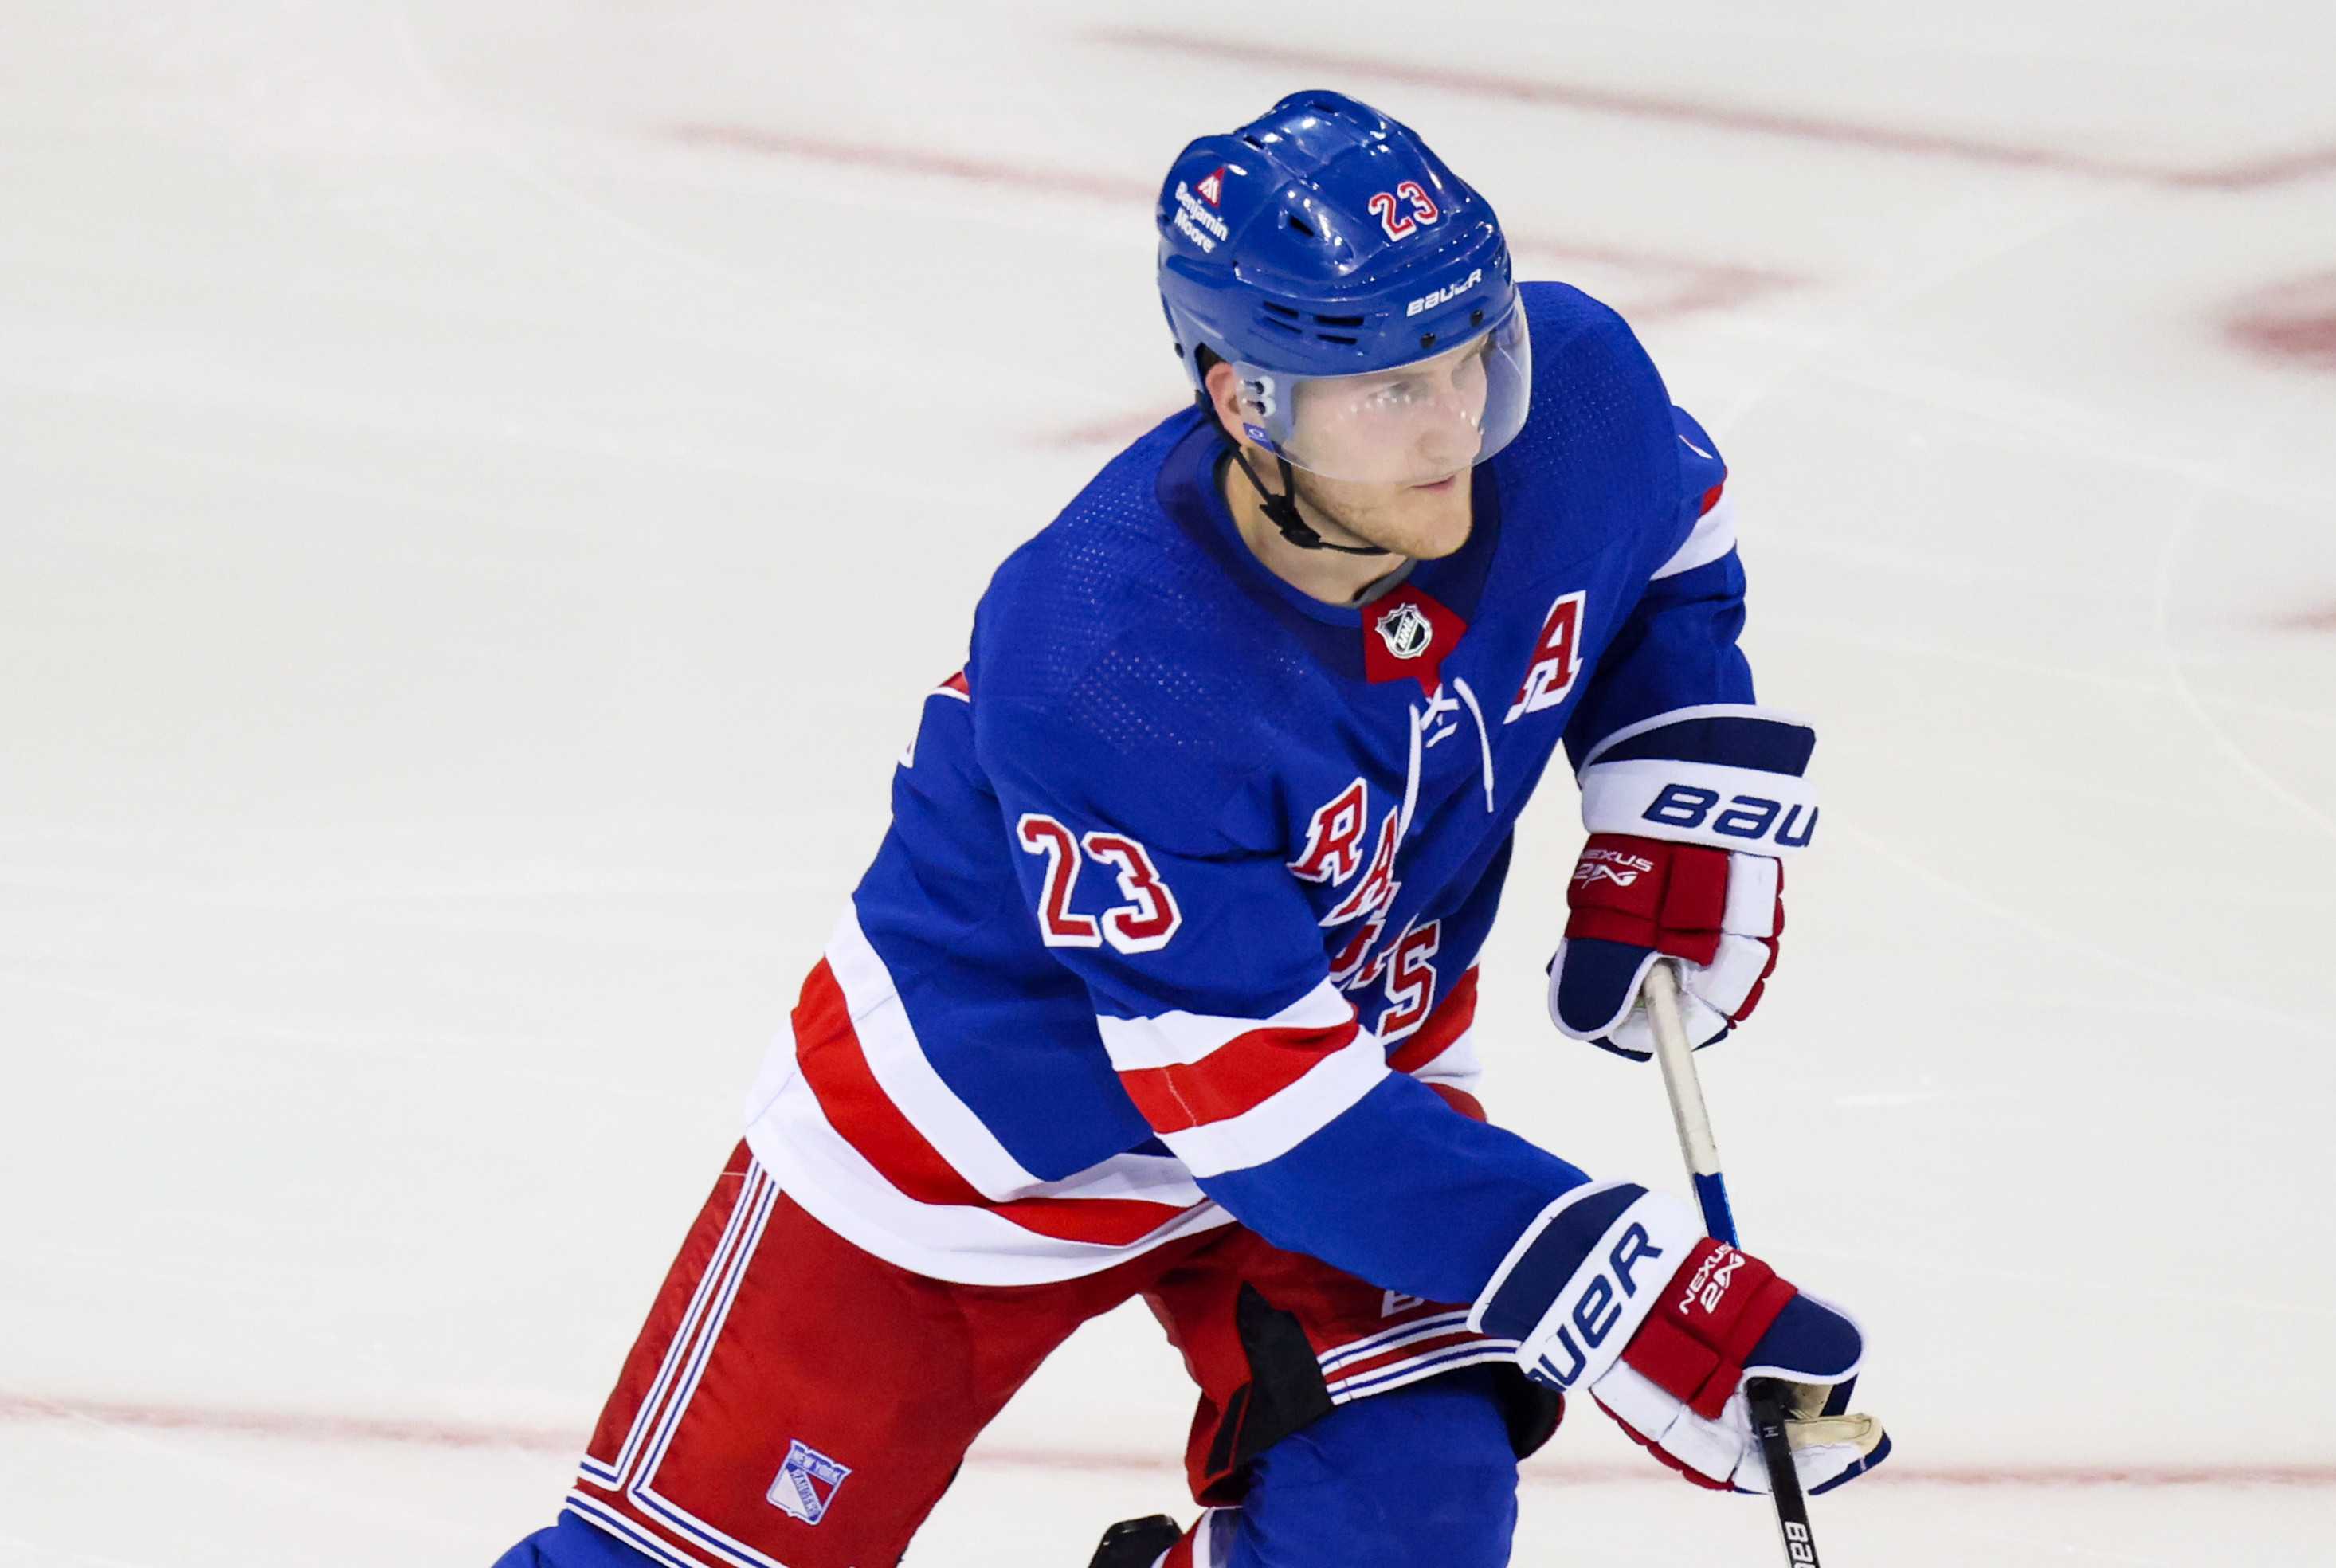 July 15 in New York Rangers history, insanity as Keenan quits